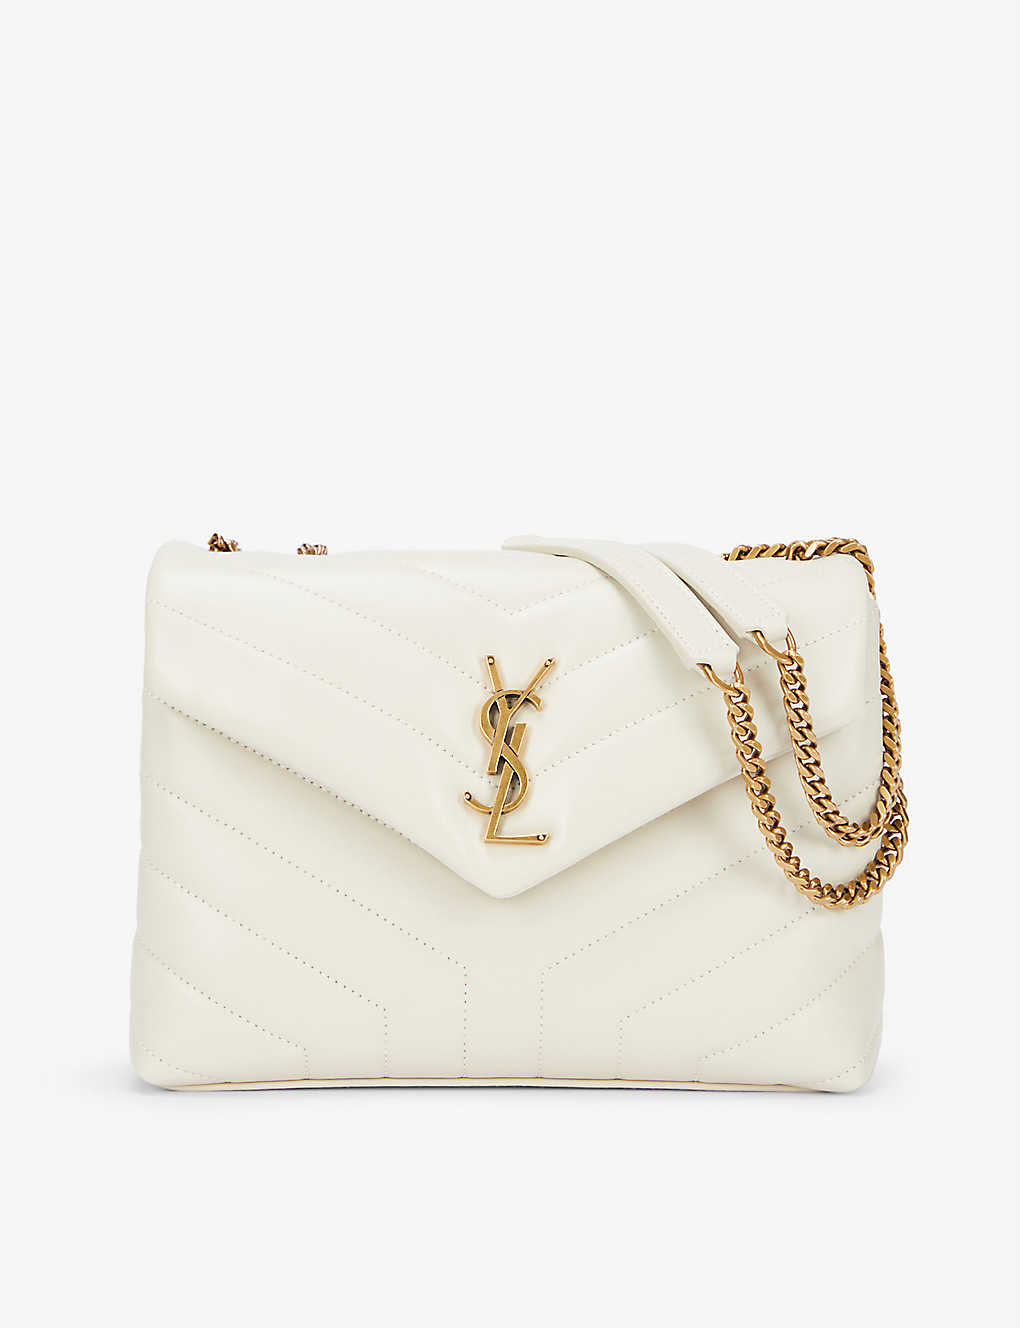 Saint Laurent Loulou Small Leather Shoulder Bag In Cream